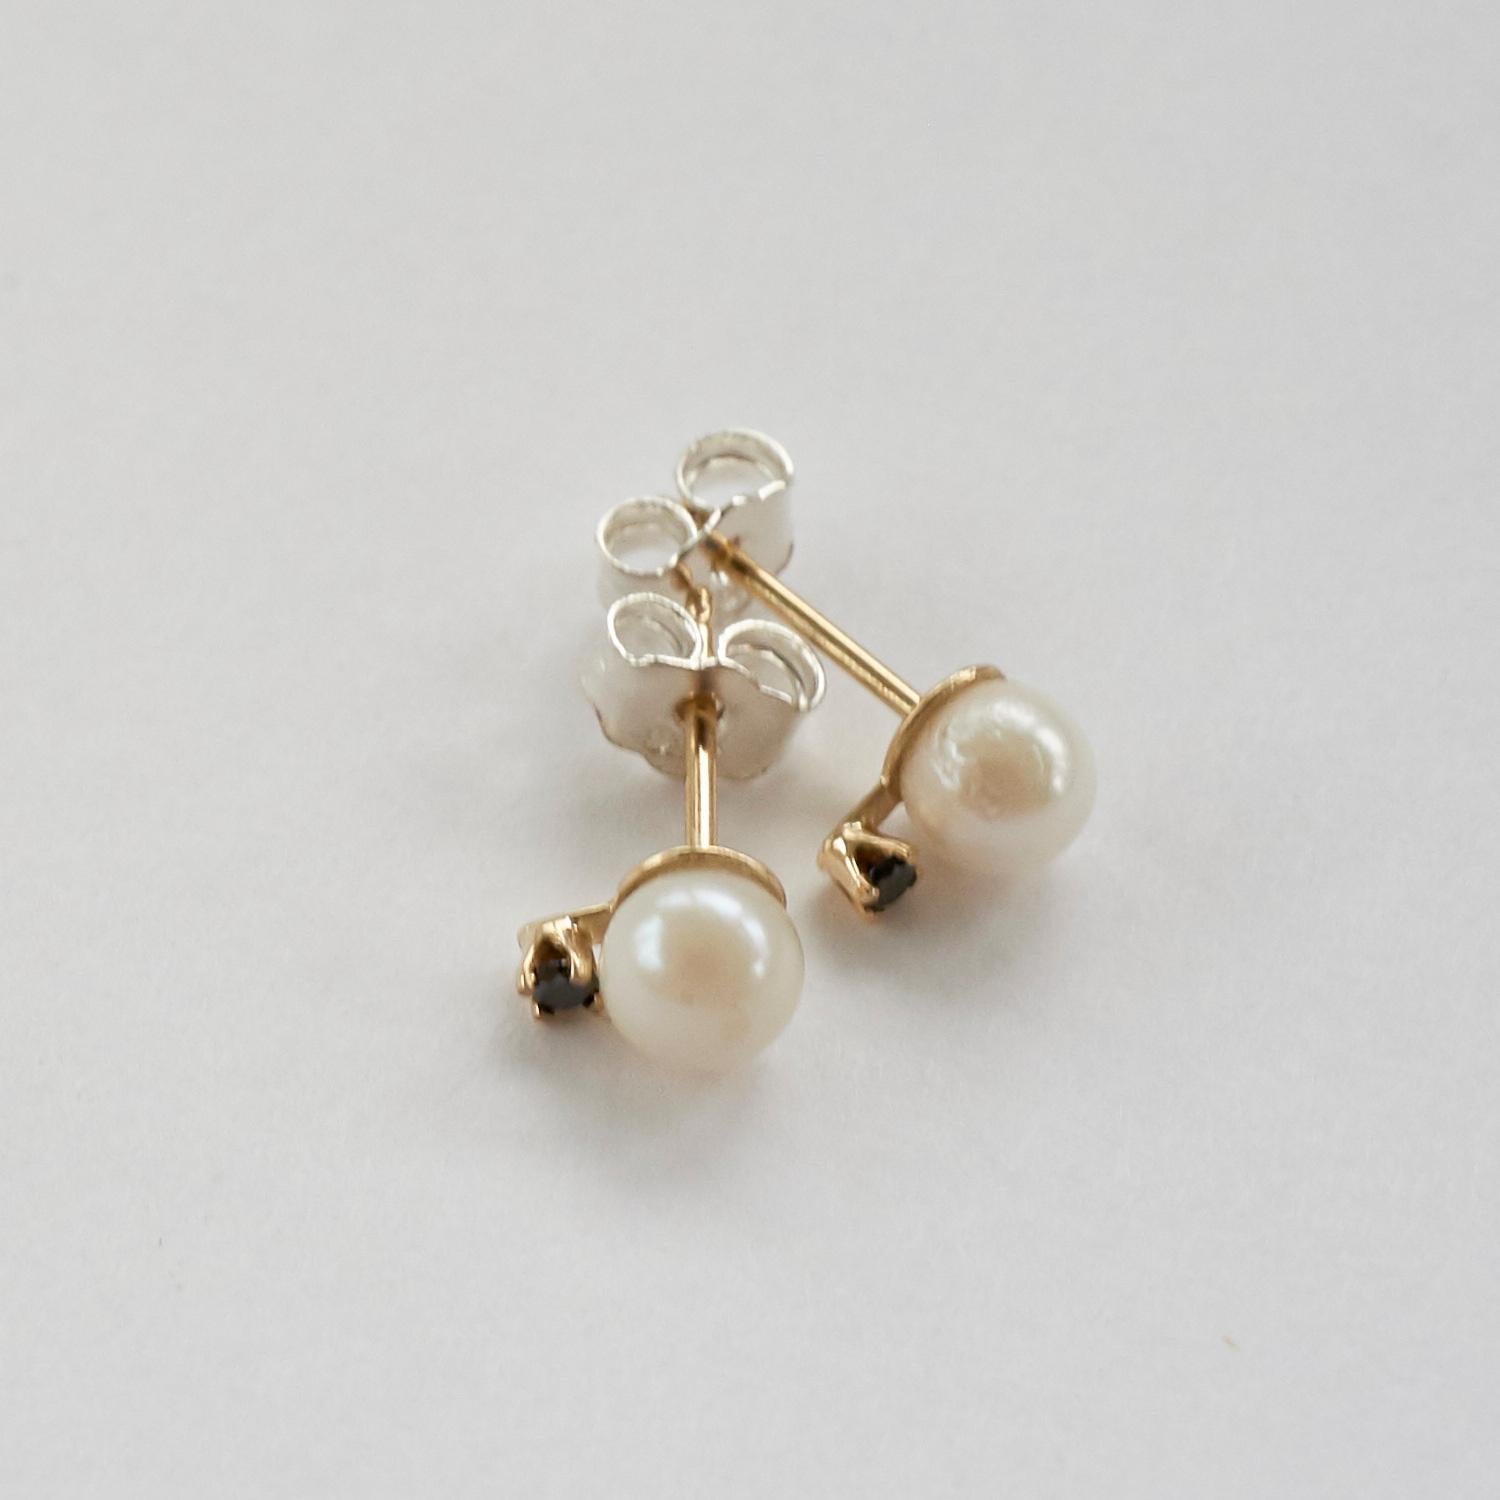 White Pearl Black Diamond Earring Stud Gold J Dauphin

Comes as a pair

Hand made in Los Angeles

Available for immediate delivery